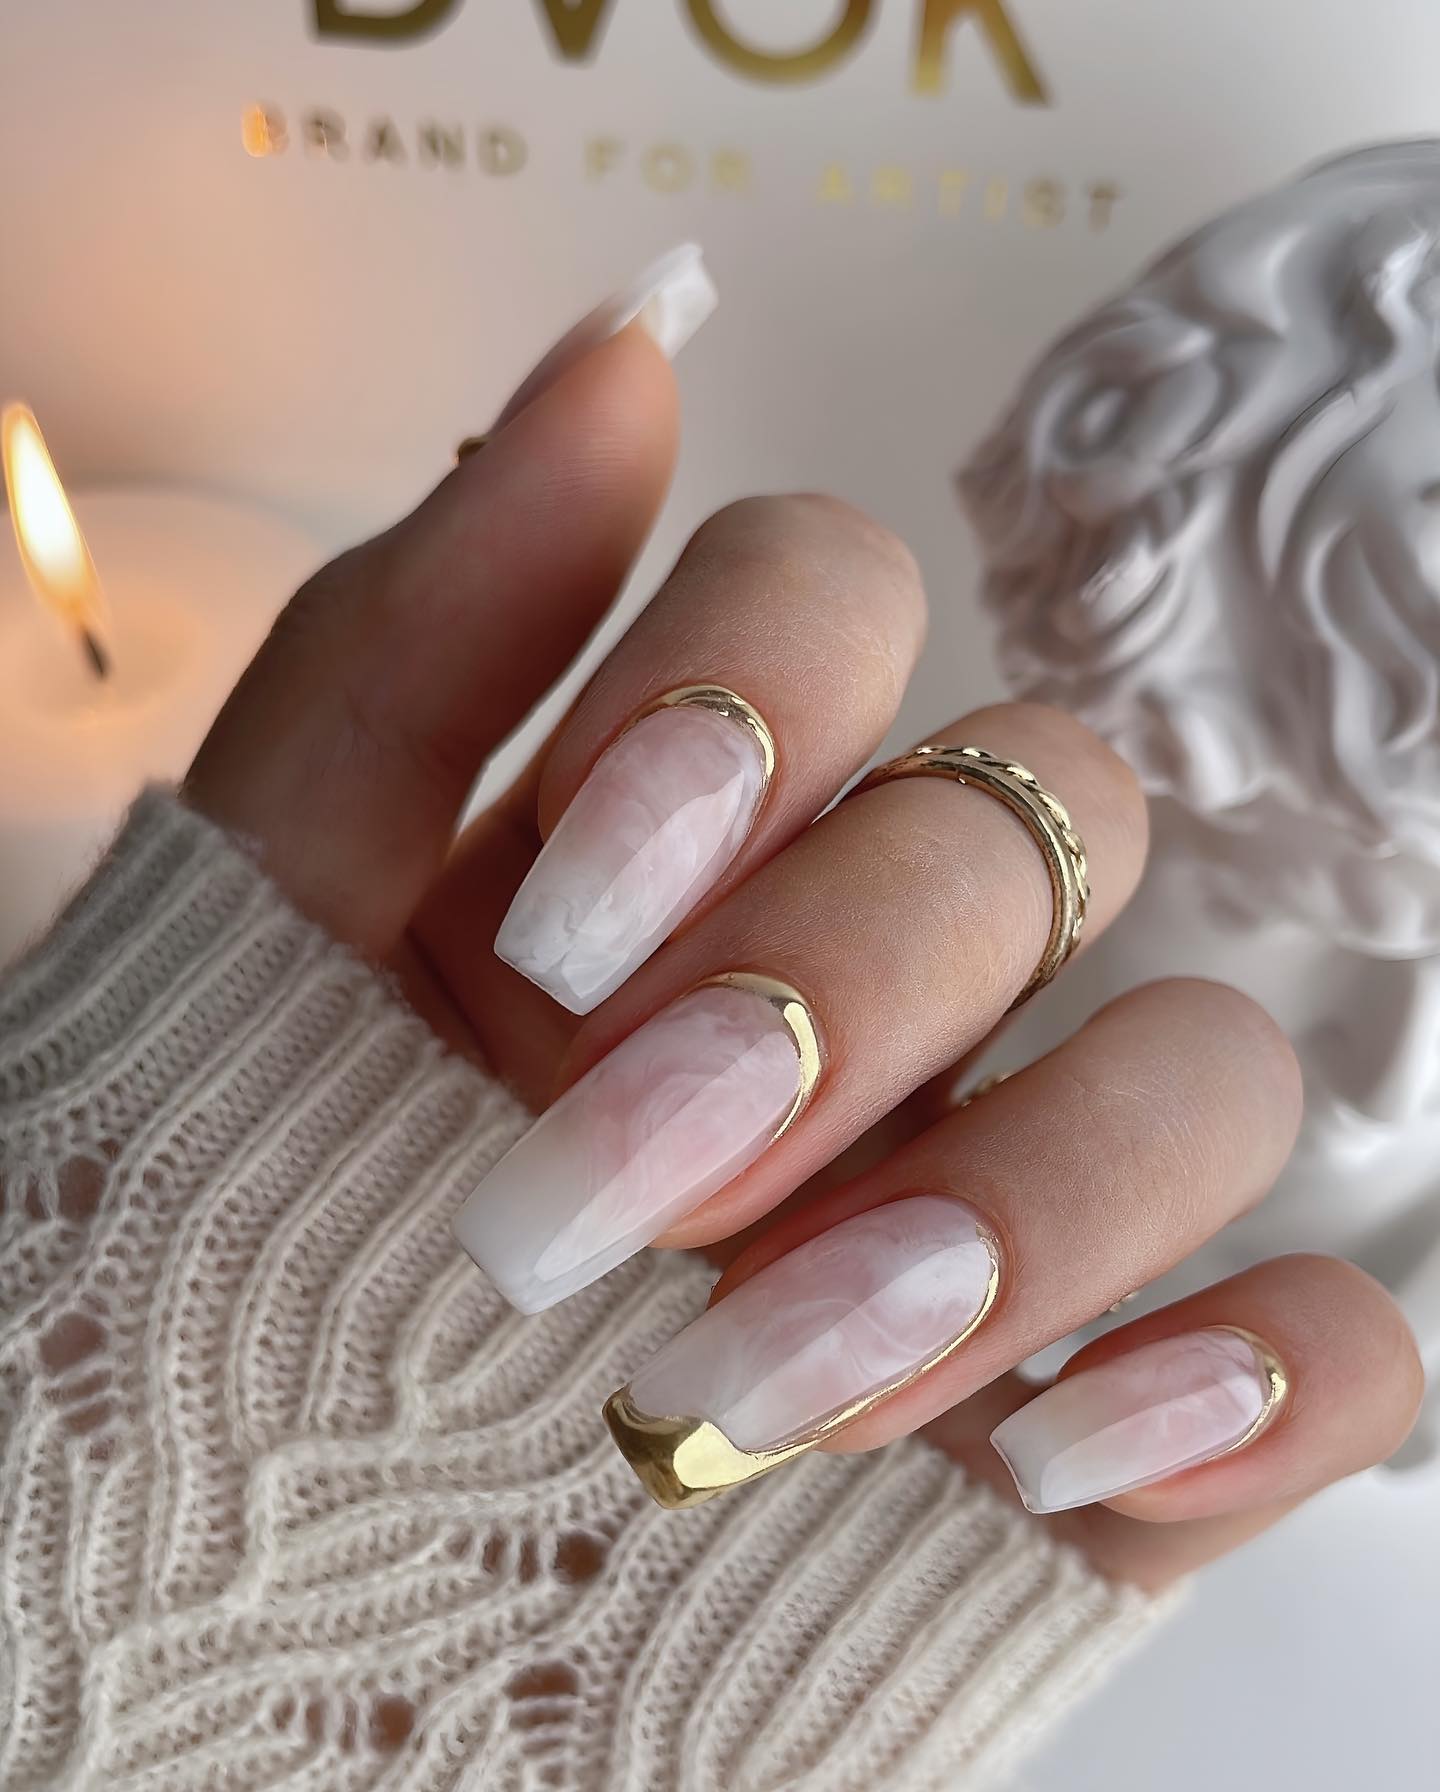 100+ Gorgeous Winter Nail Designs And Ideas images 34